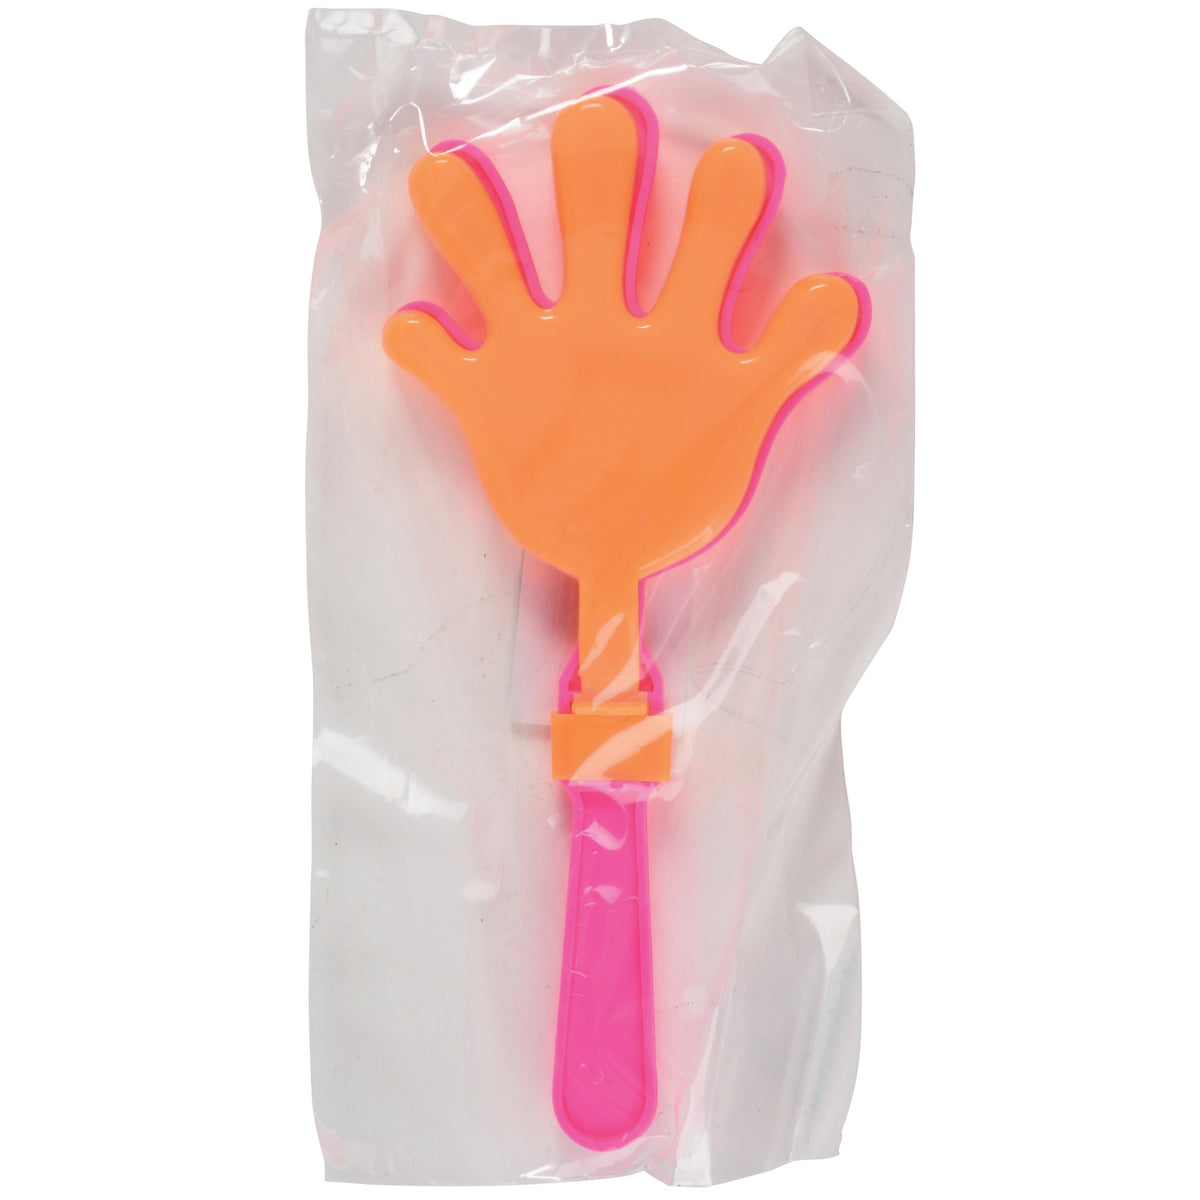 Hand Clappers - 12 Count: Rebecca's Toys & Prizes